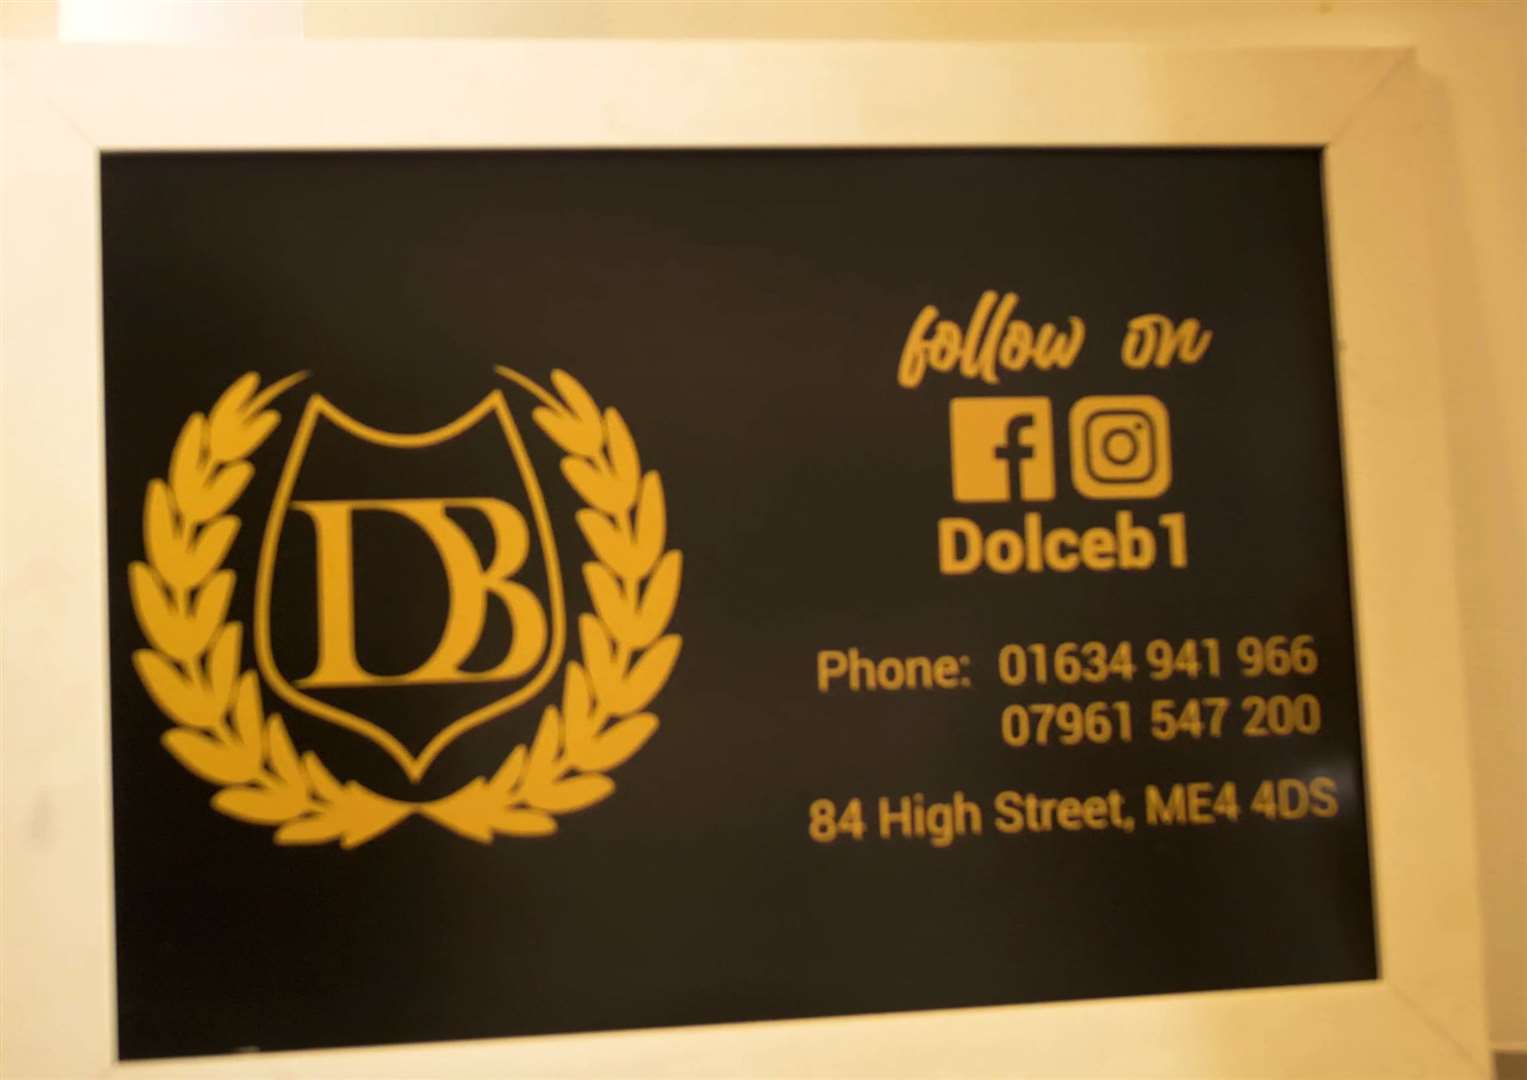 Contact information at Dolce B's